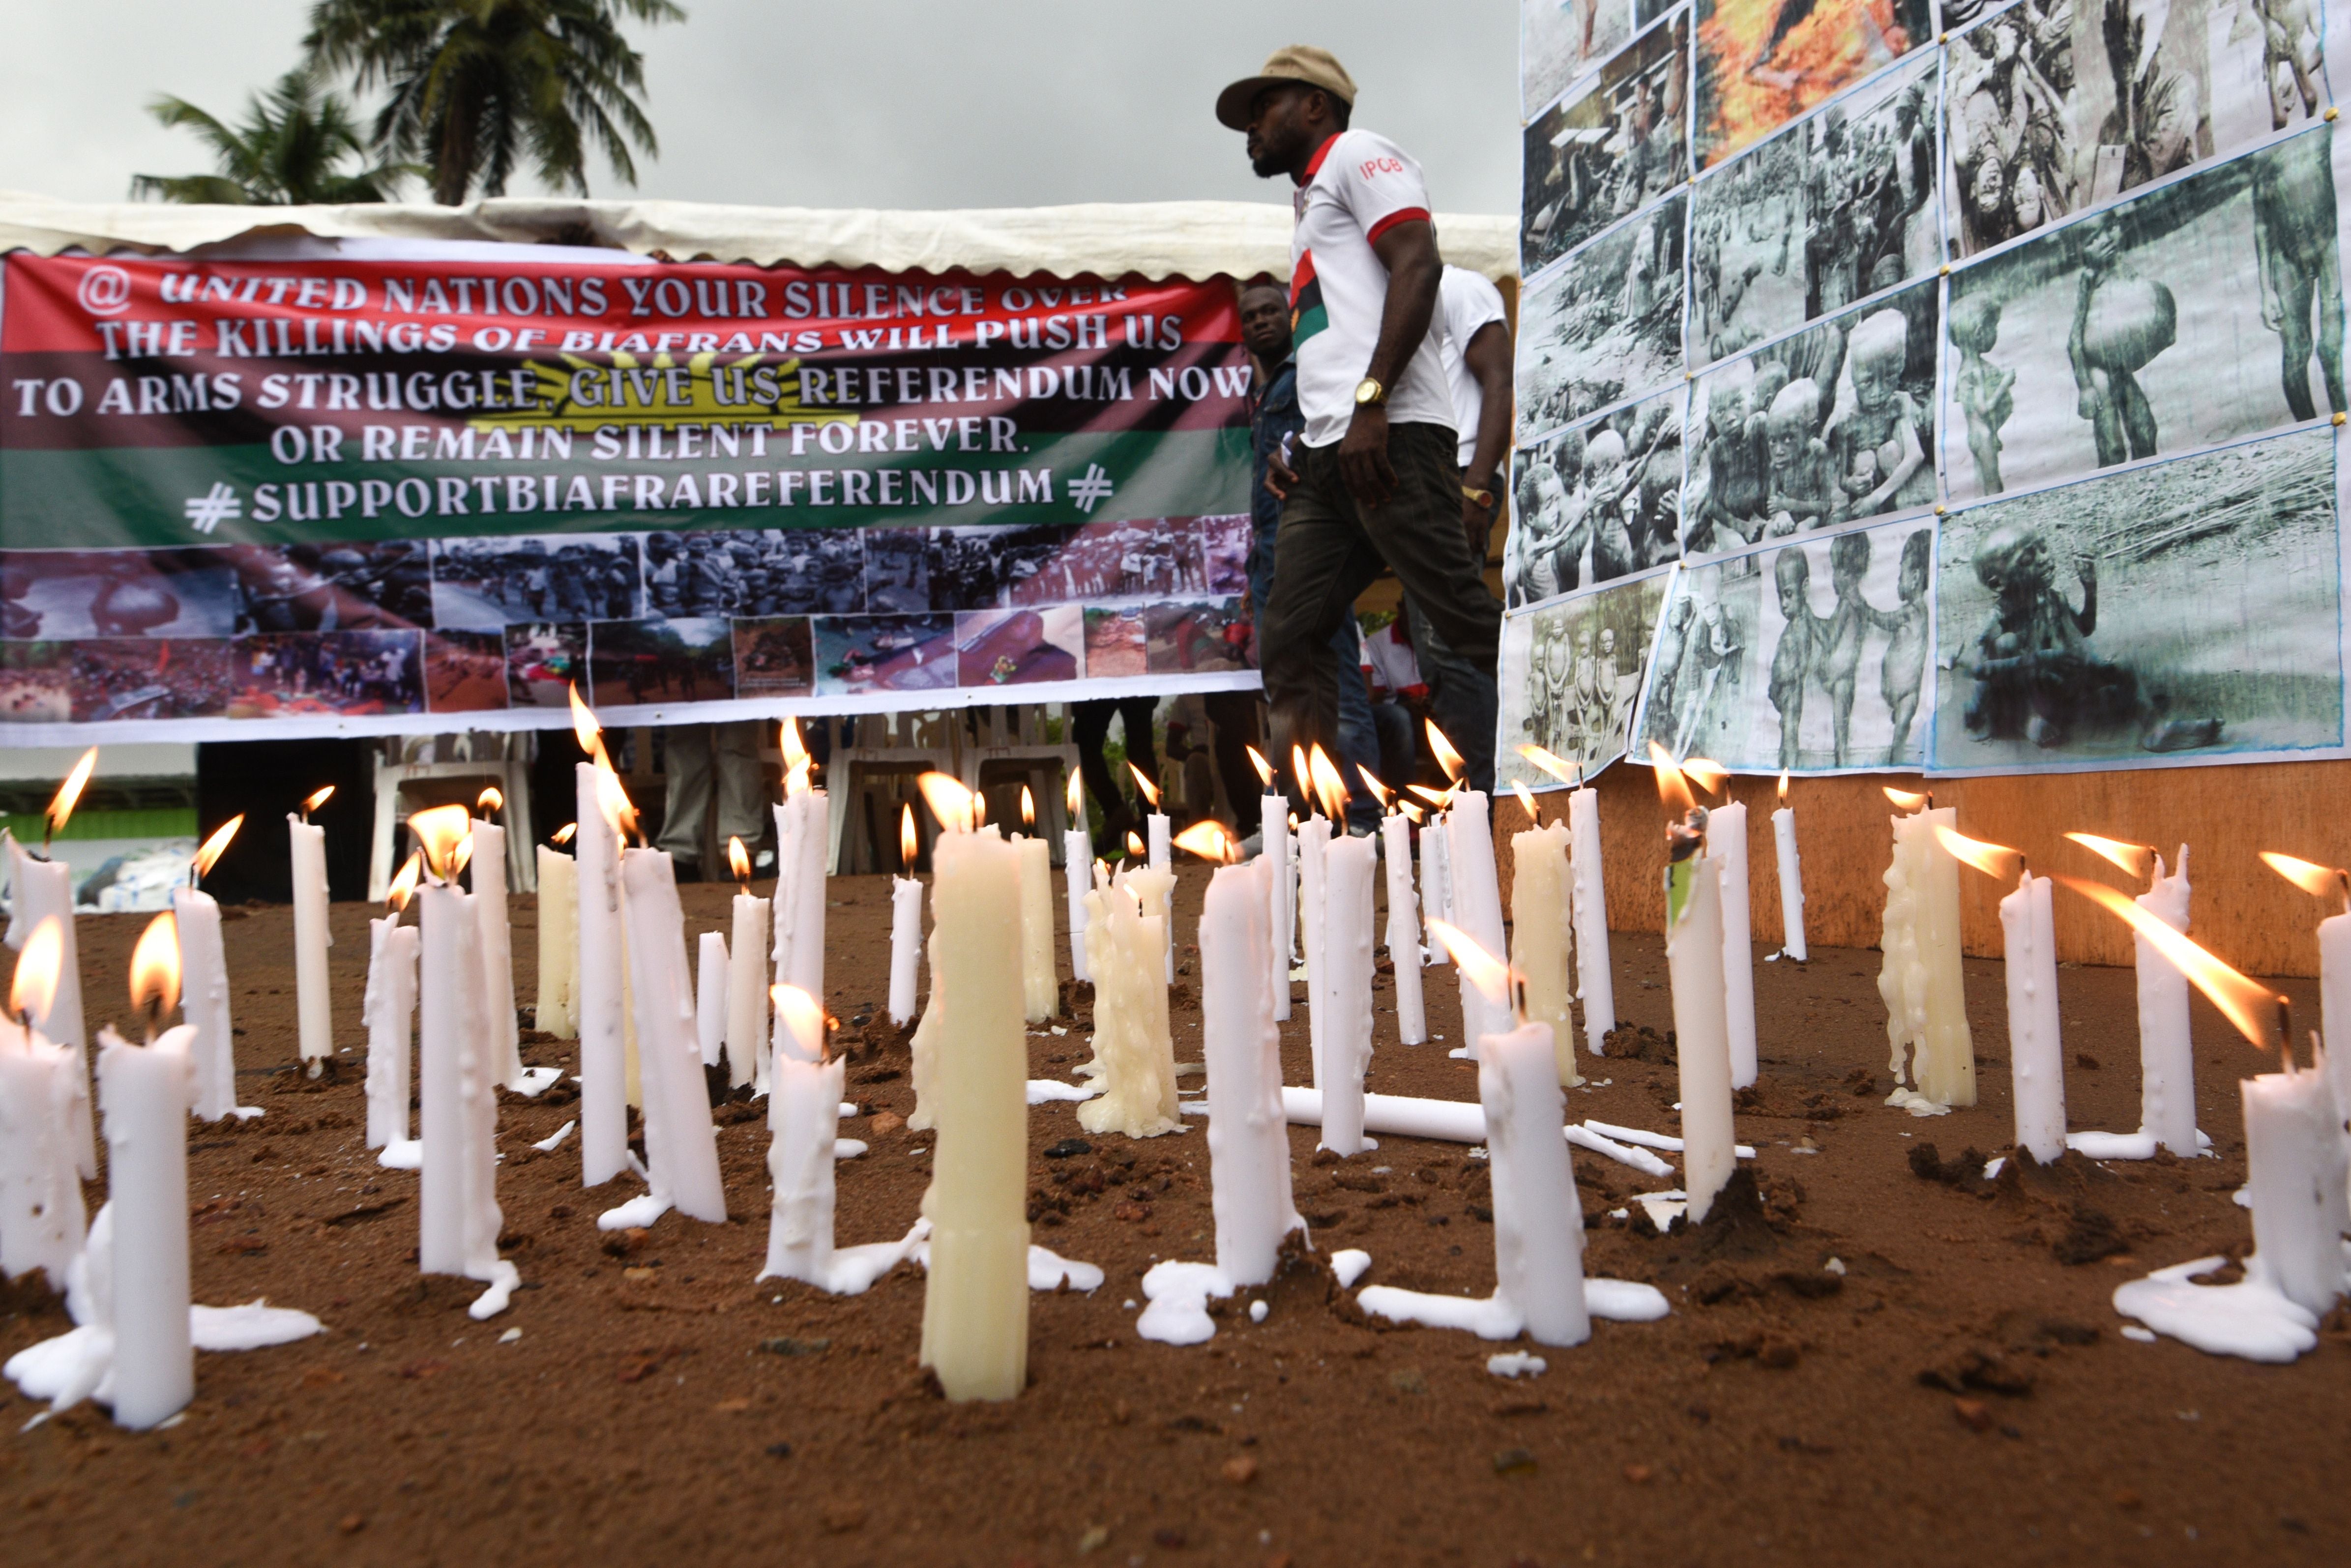 Banners and candles are displayed in Abidjan during a ceremony commemorating the Biafran war from 1967 to 1970